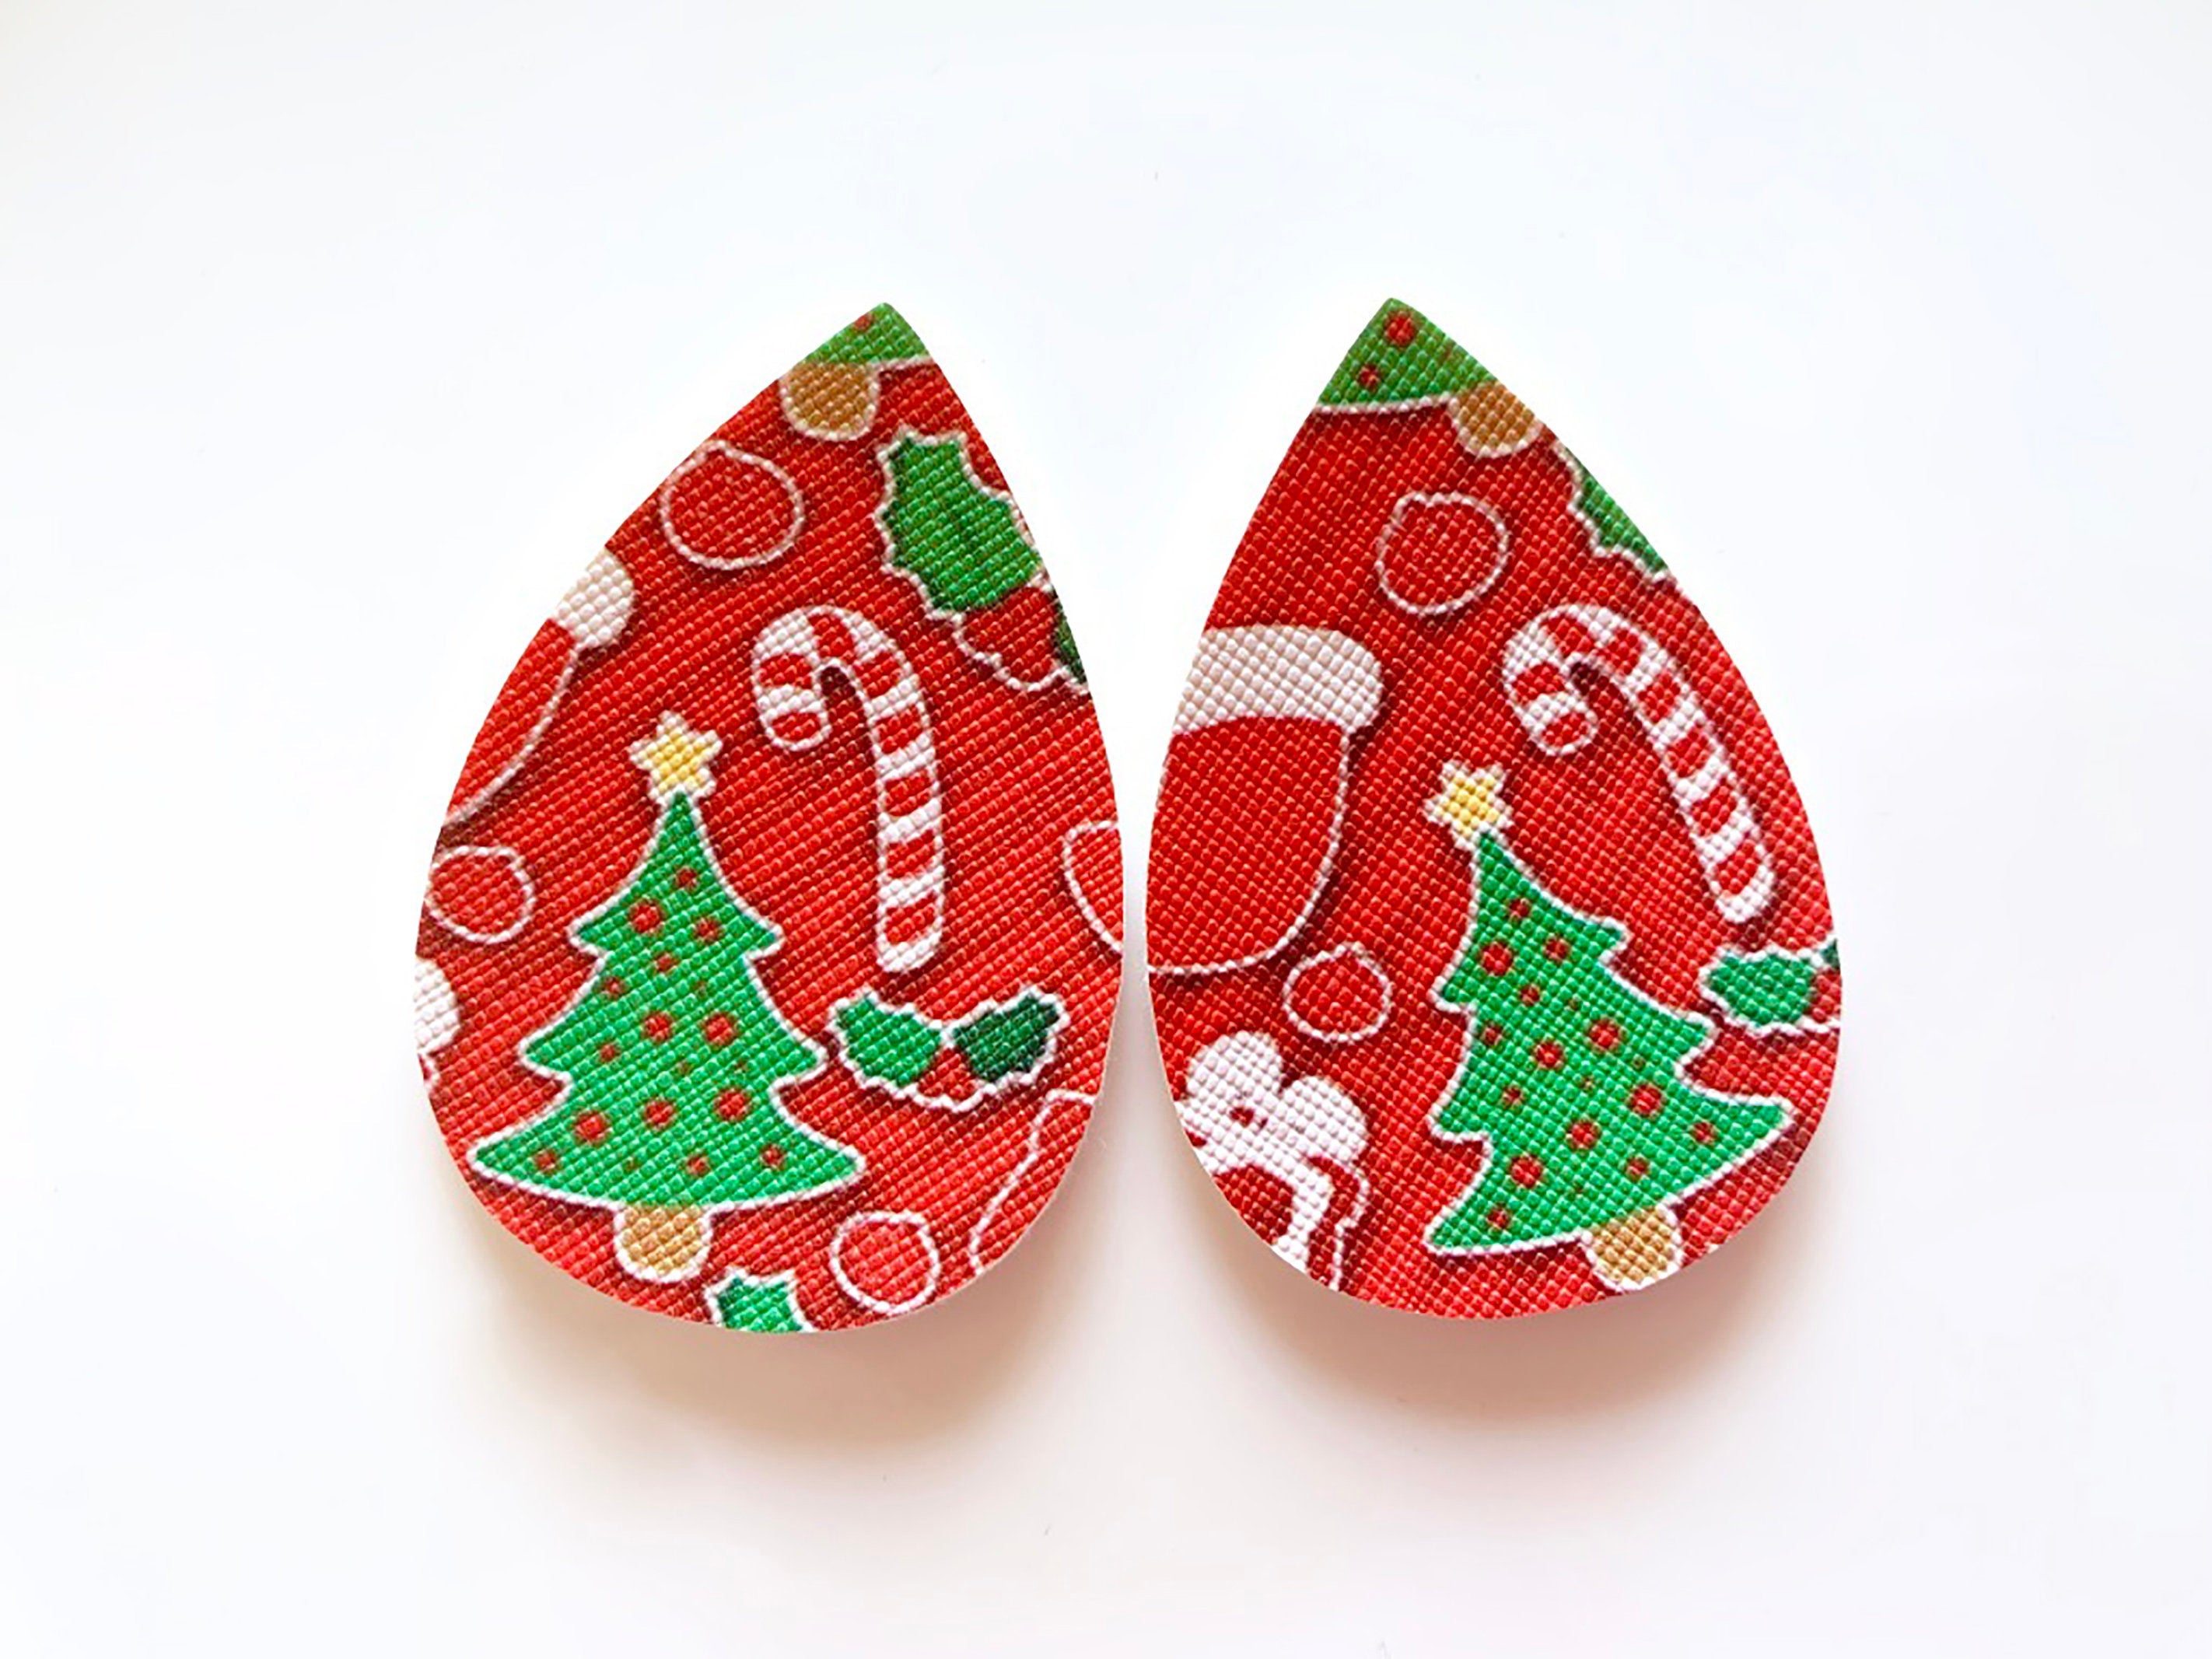 2pcs/4pcs, 60mmx40mm, PU Leather / Faux Leather Drop Shaped Die Cut / Pendant in Christmas Stocking Prints